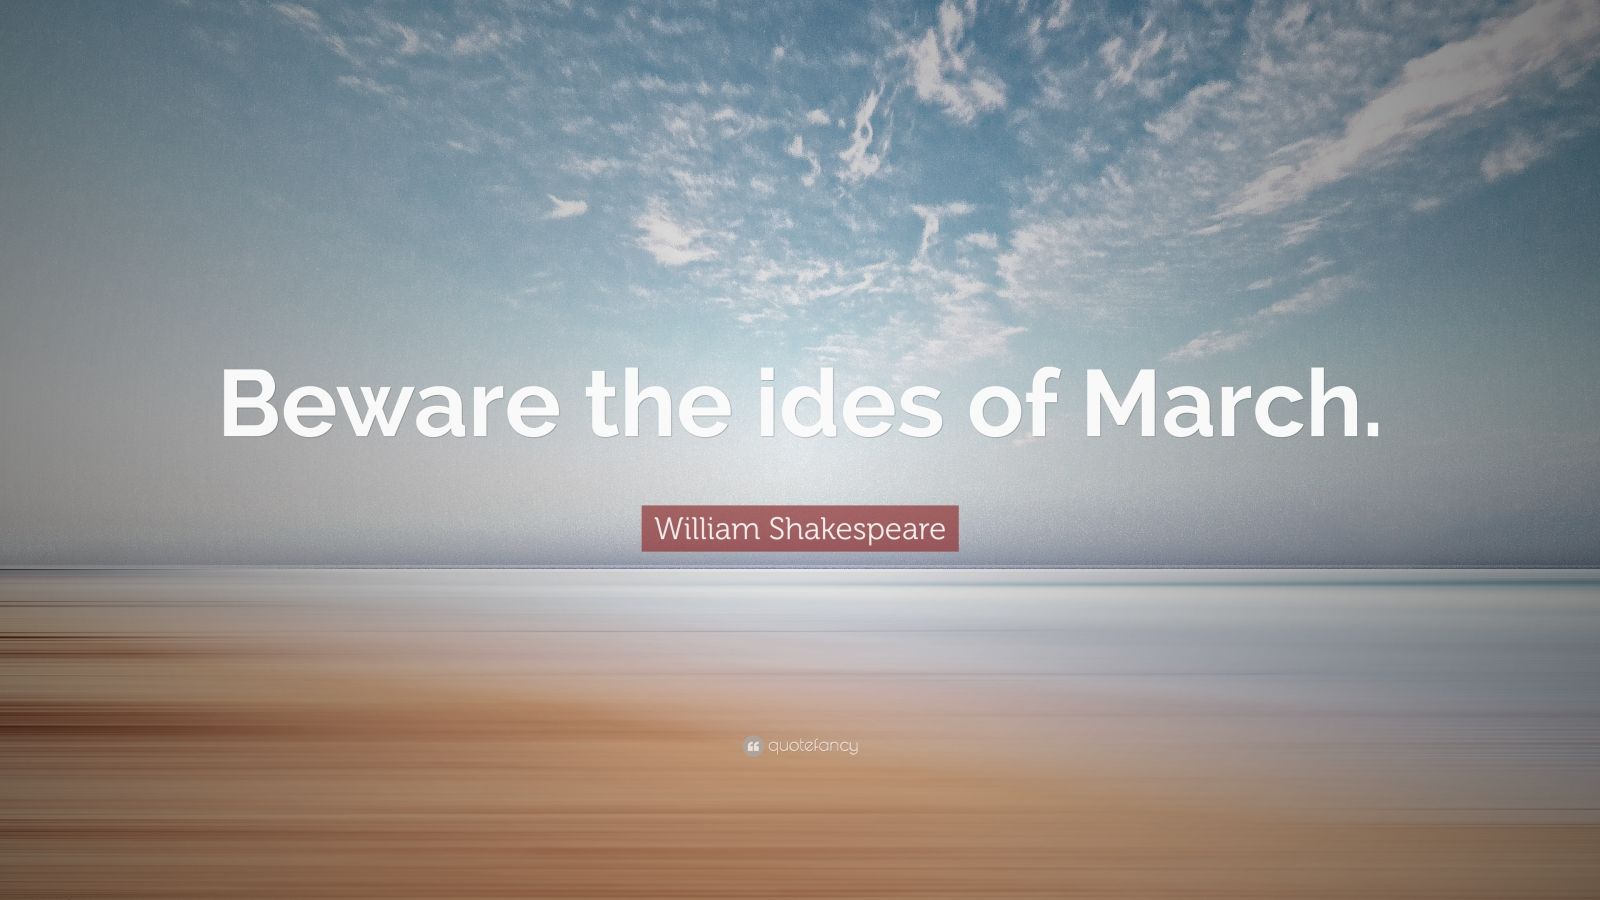 William Shakespeare Quote “Beware the ides of March.” (9 wallpapers